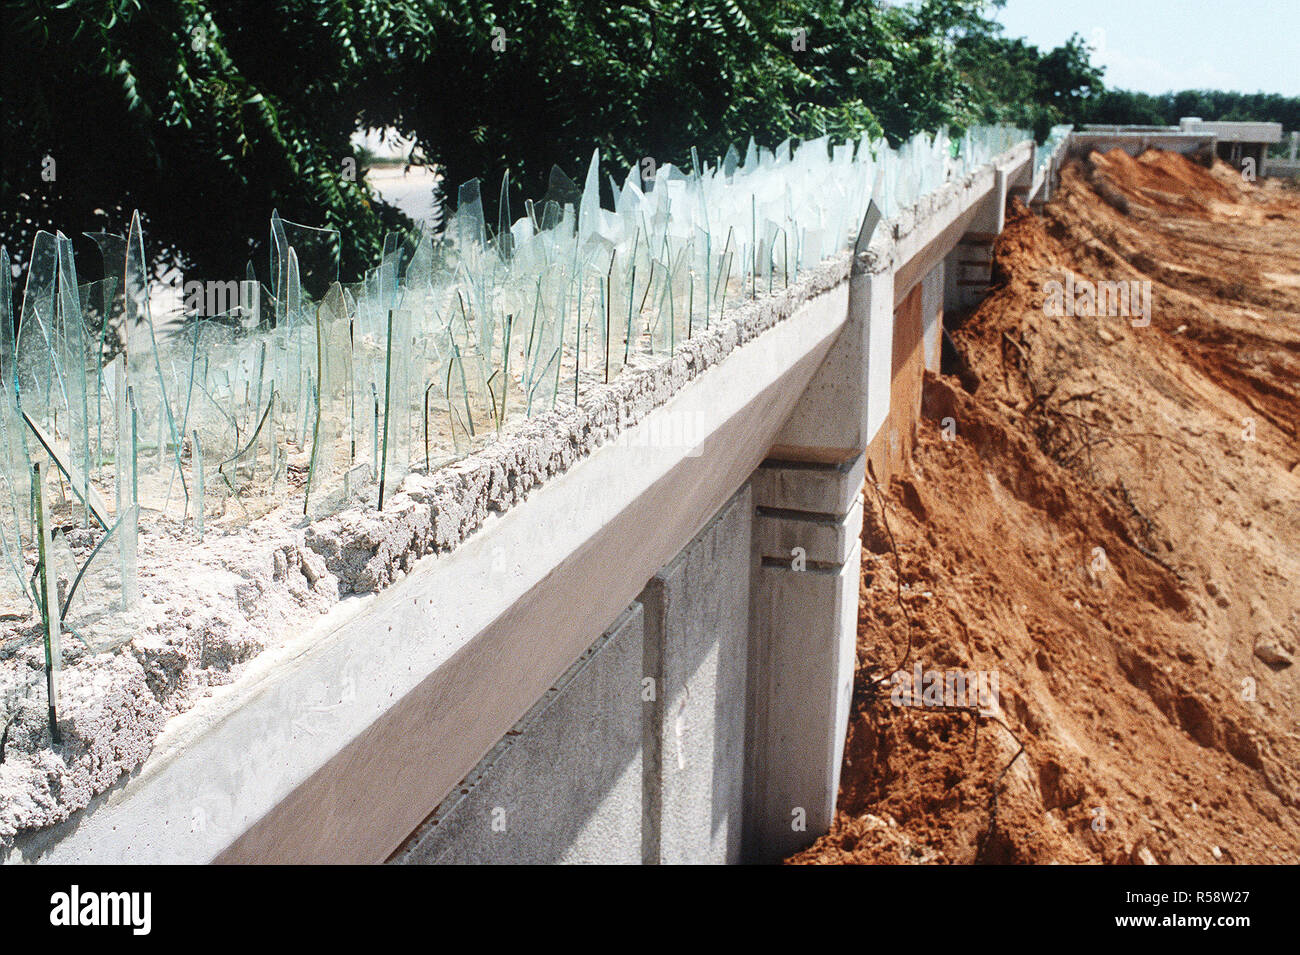 1993 - A view of a section of the wall that surrounds the Joint Task Force Somalia headquarters.  The headquarters was established in the former U.S. Embassy compound during the multinational relief effort Operation Restore Hope. Stock Photo